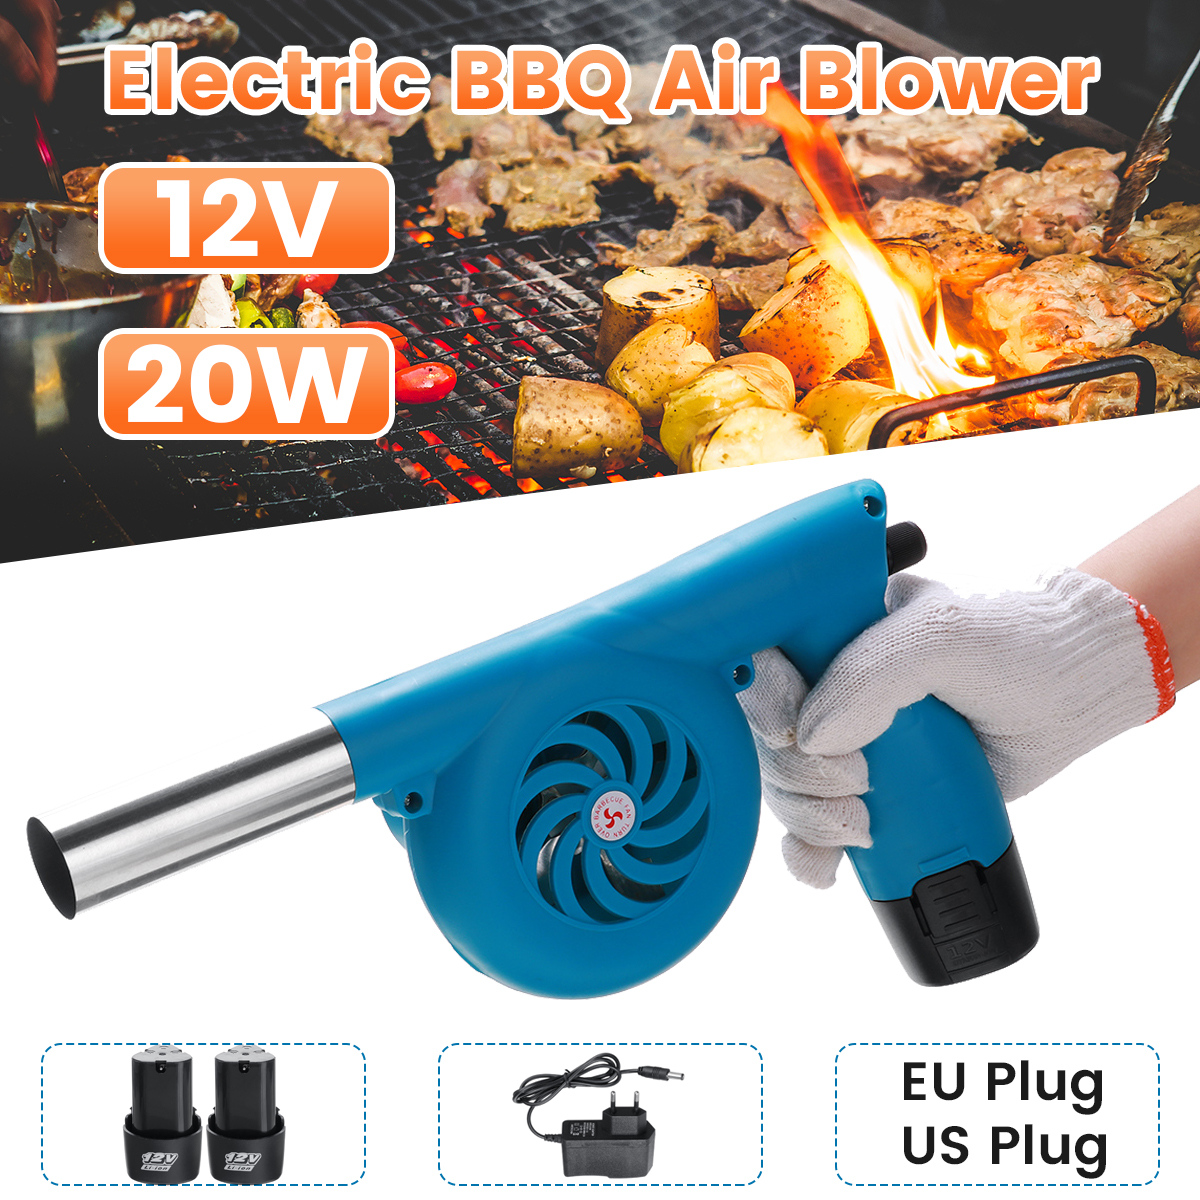 12V-Outdoor-Cooking-Electric-BBQ-Fan-Air-Blower-Rechargeable-BBQ-Grill-Fan-Guns-Portable-Fire-Campin-1861810-1